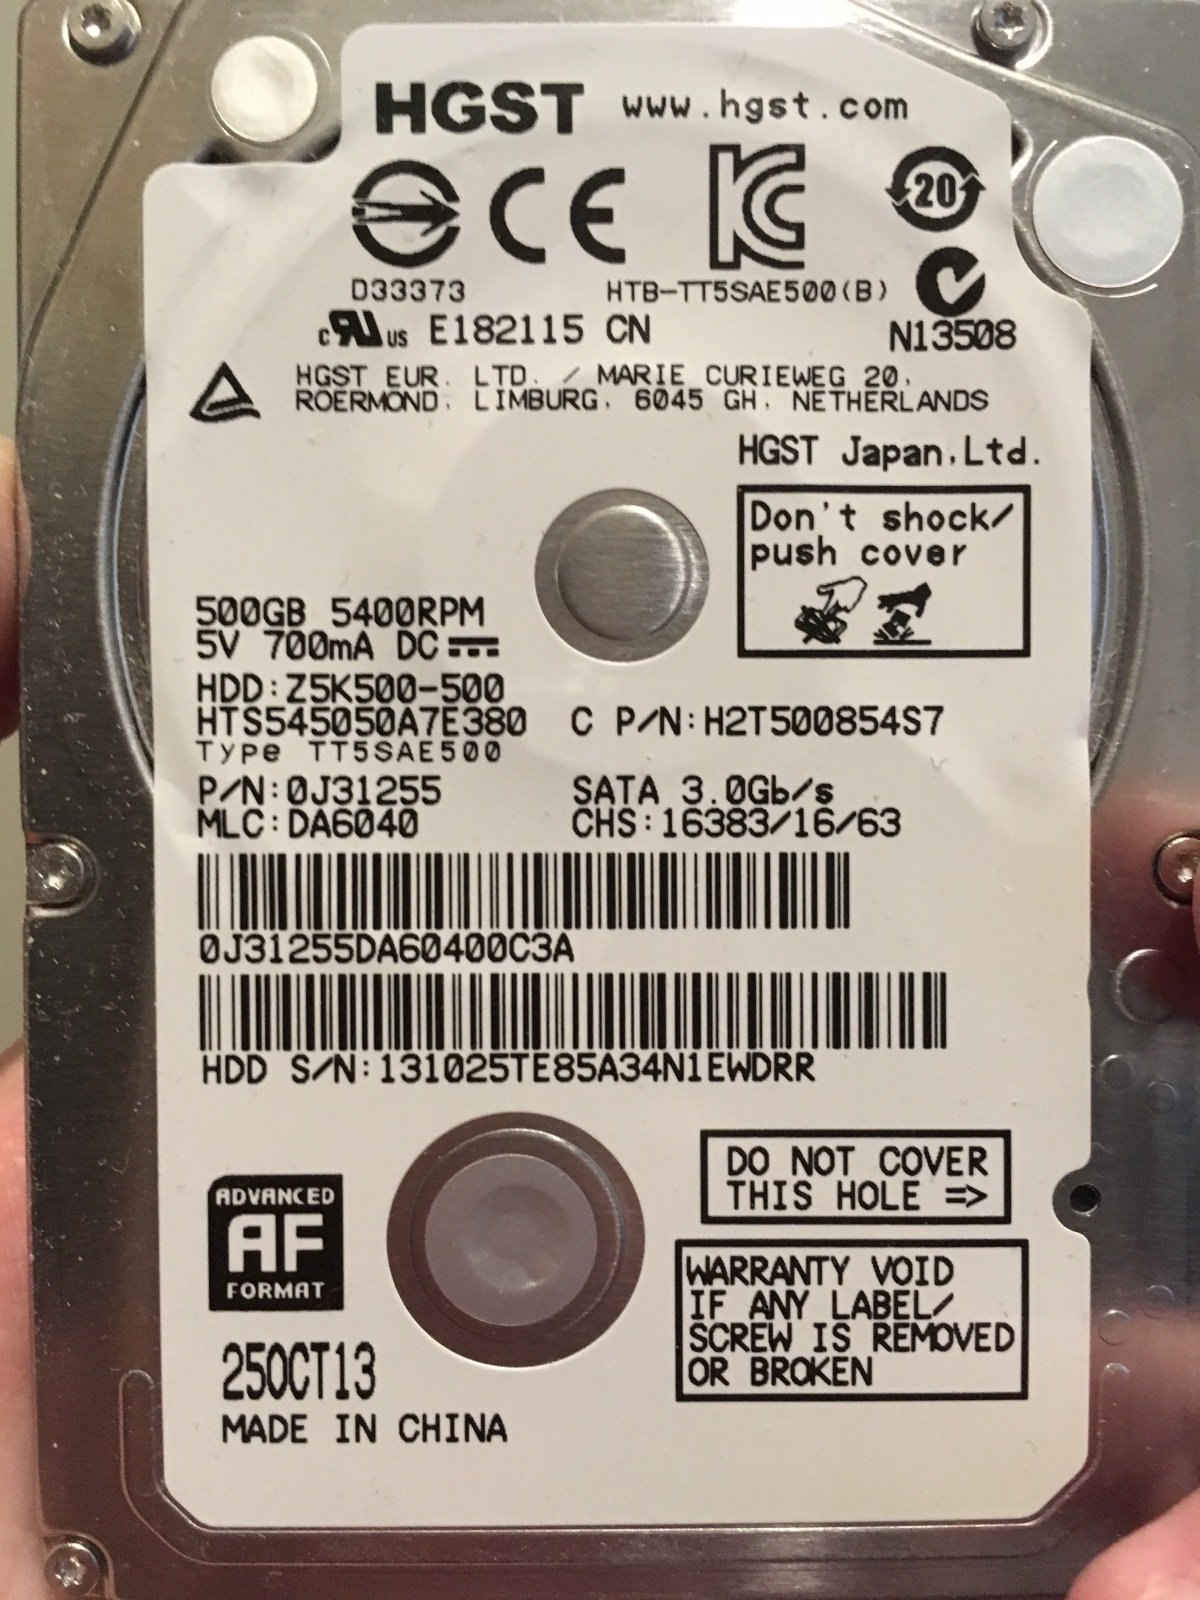 How do i get a HGST HDD to work with my Xbox 360 Premium? | GBAtemp.net -  The Independent Video Game Community